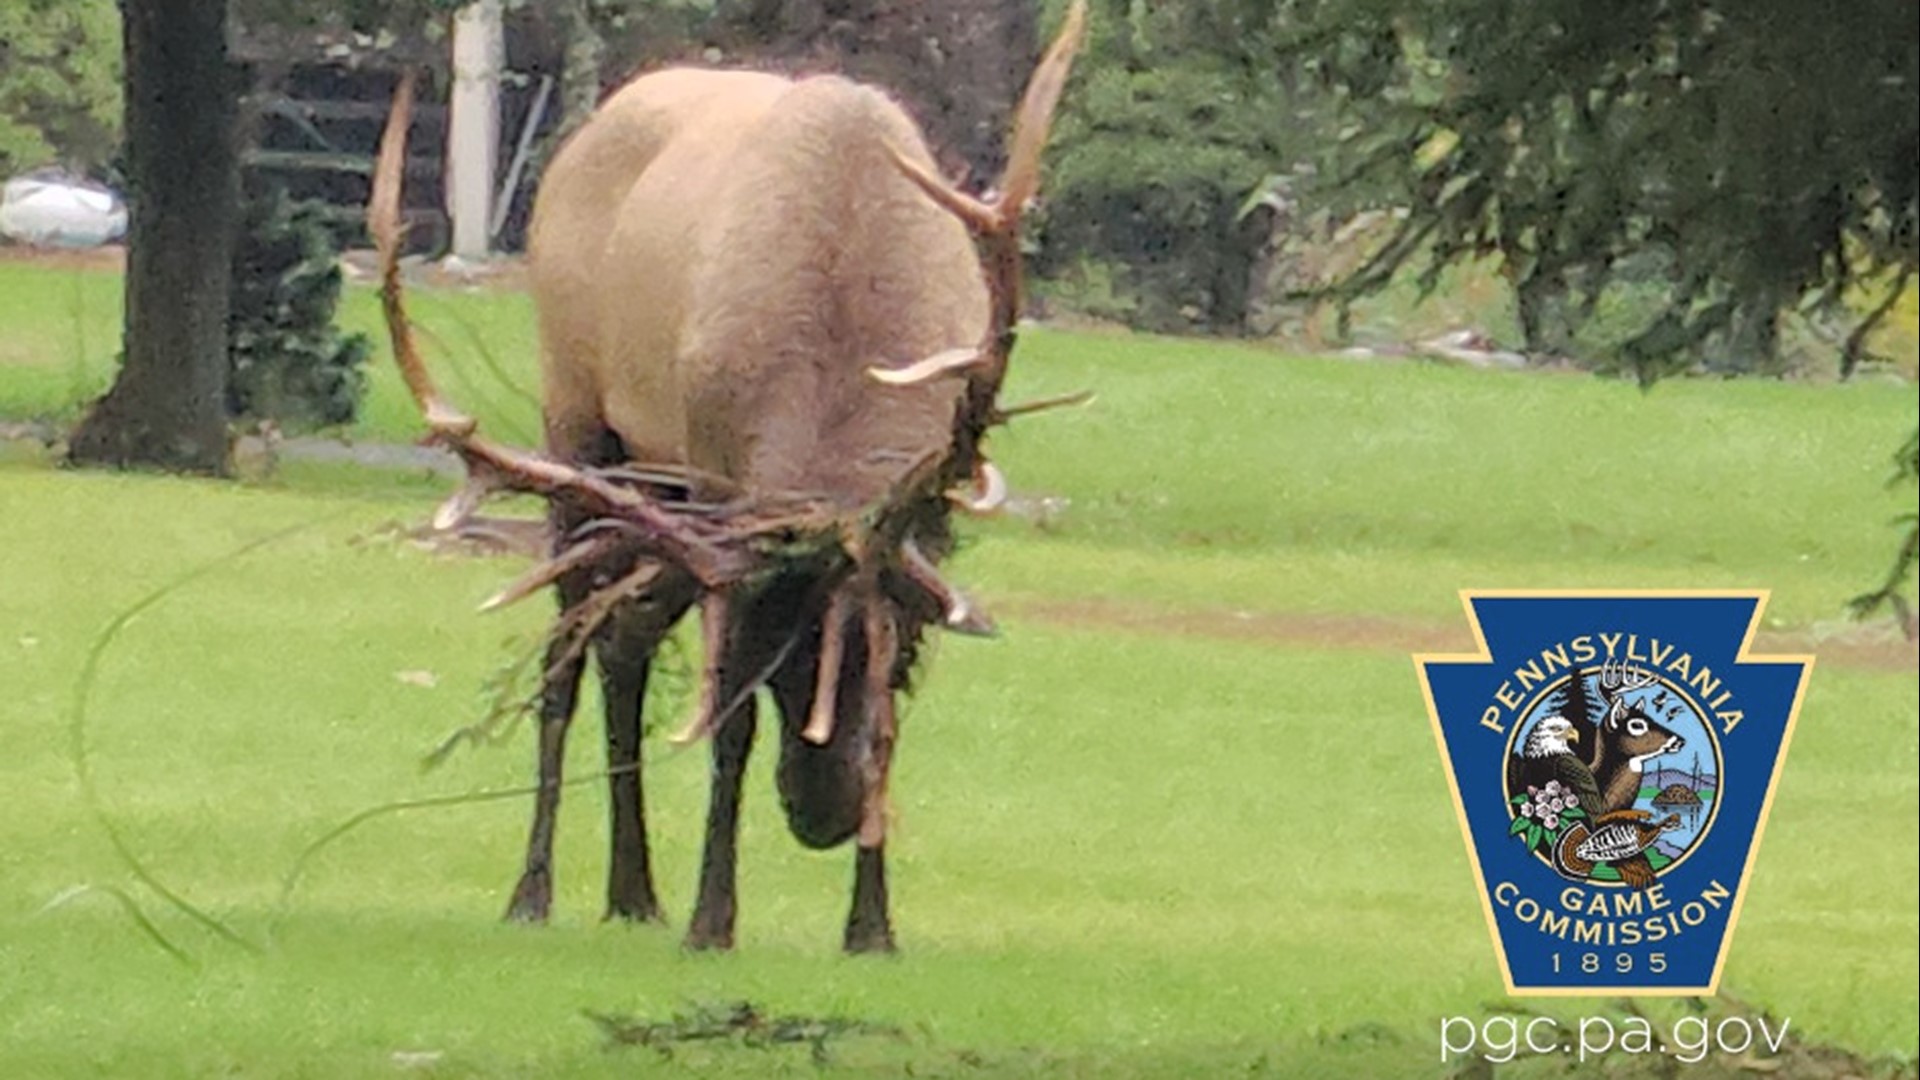 Pennsylvania Game Commission officials and biologists were able to help the bull elk by untangling its huge antlers.